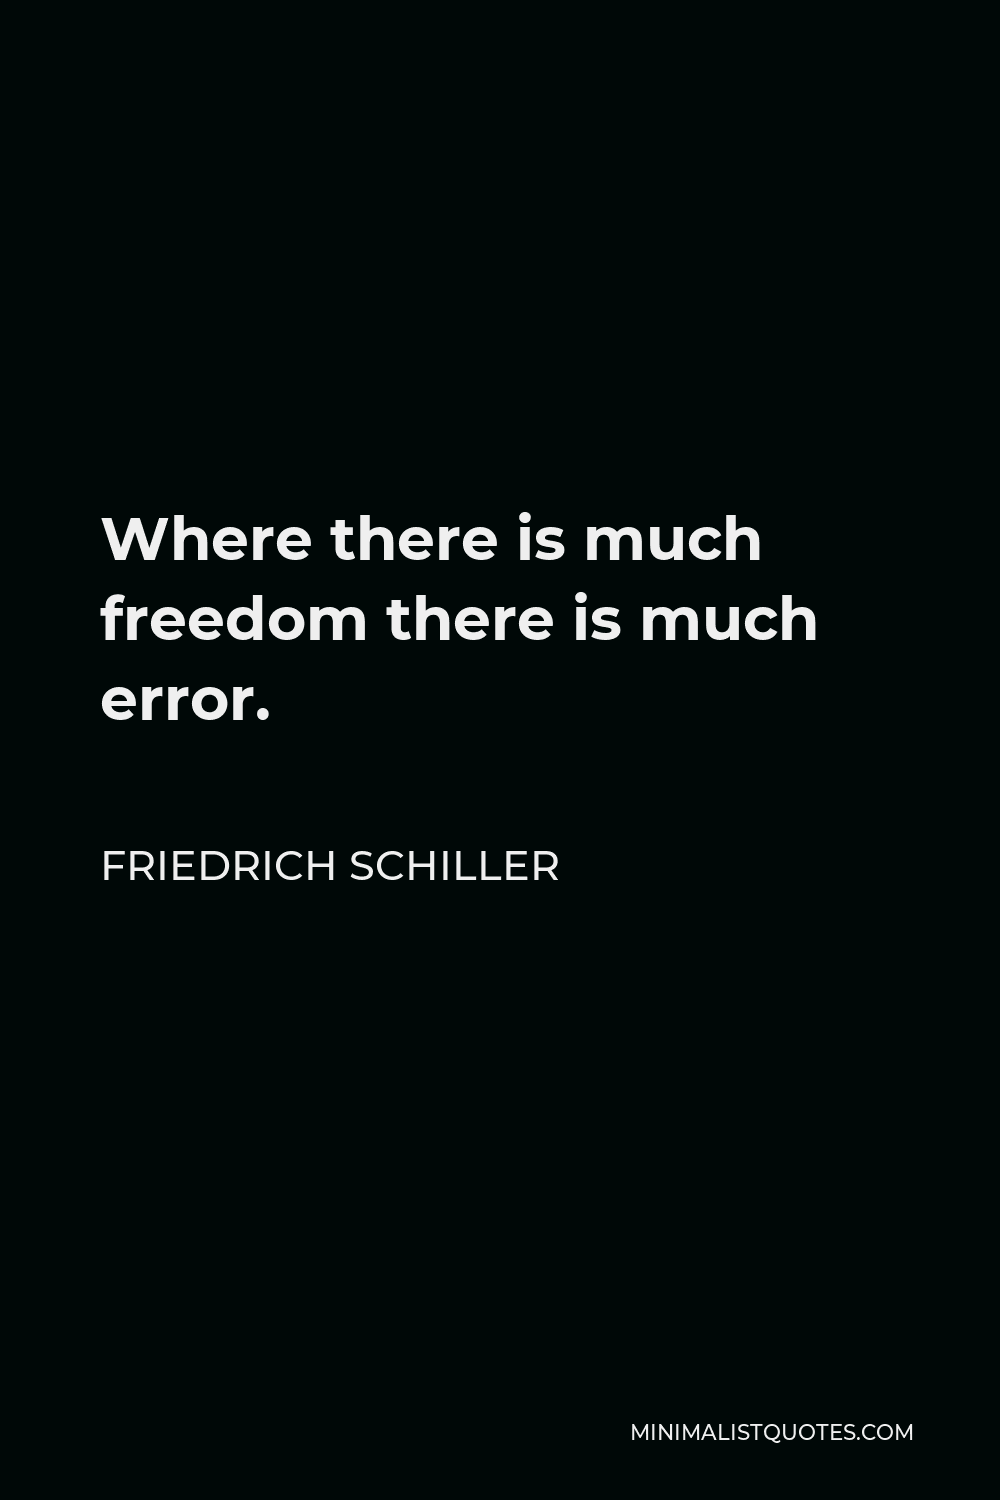 Friedrich Schiller Quote - Where there is much freedom there is much error.